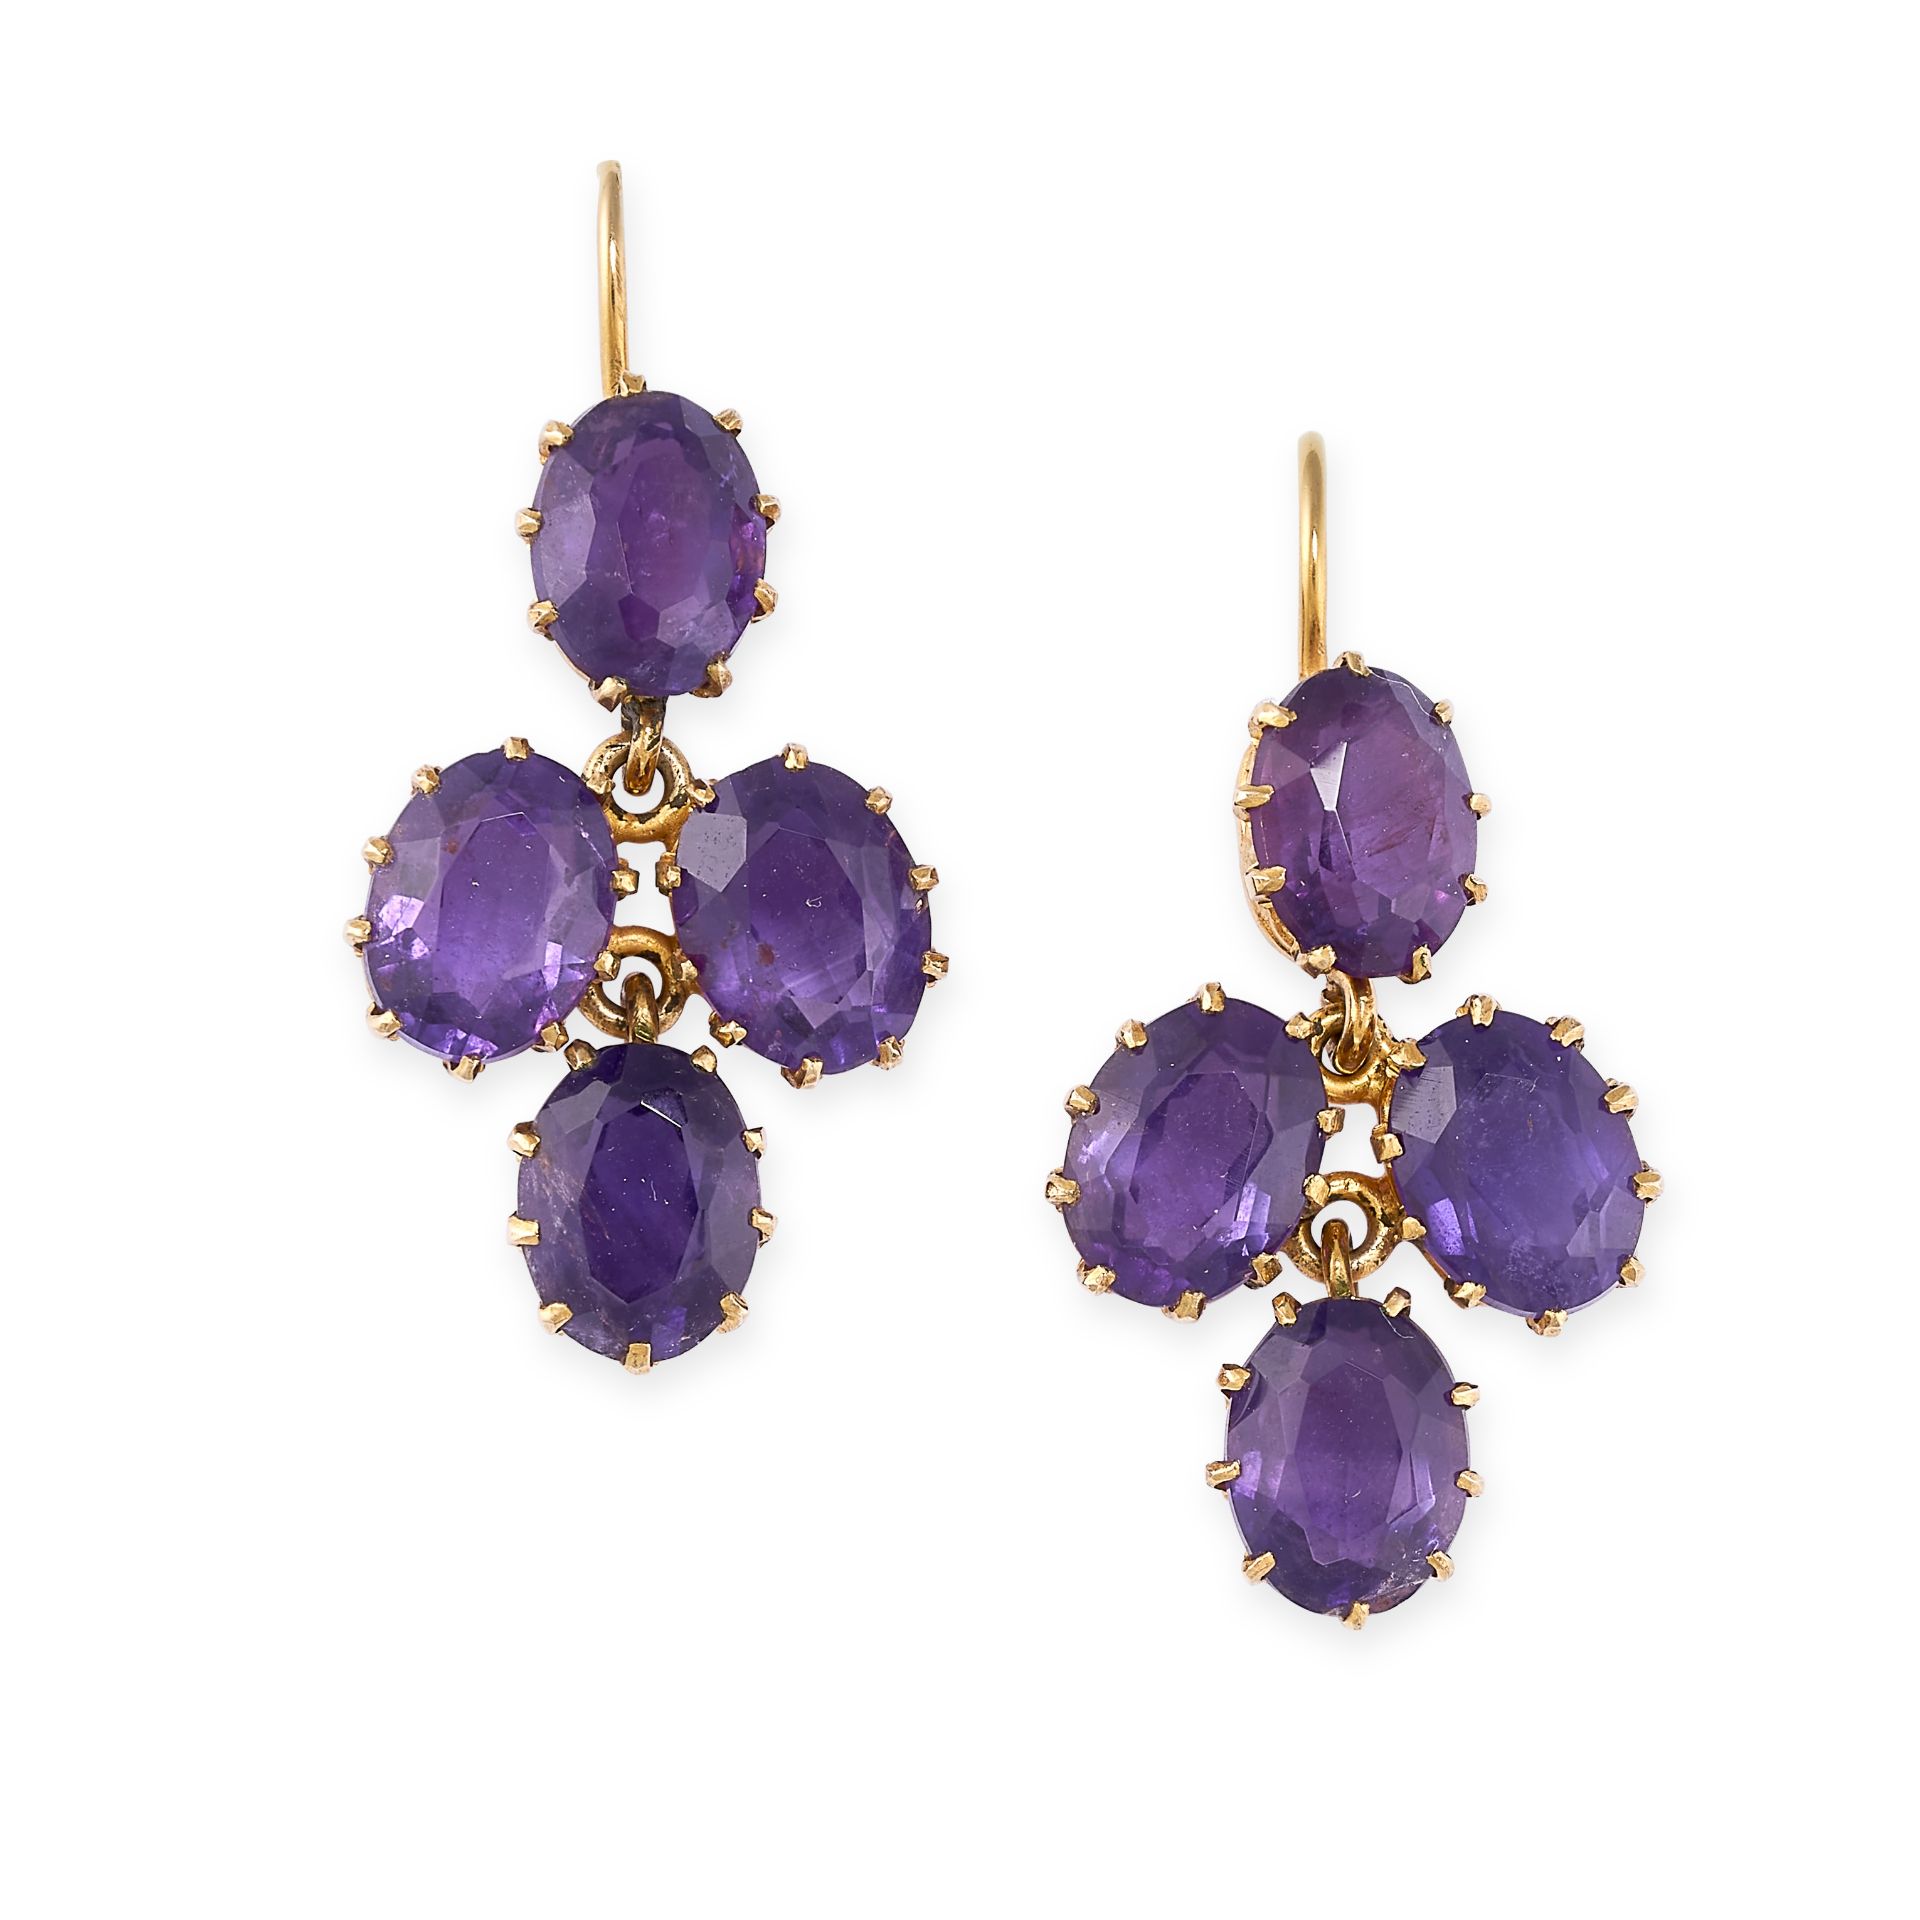 A PAIR OF AMETHYST EARRINGS in yellow gold, of quatrefoil design, set with oval cut amethysts, no